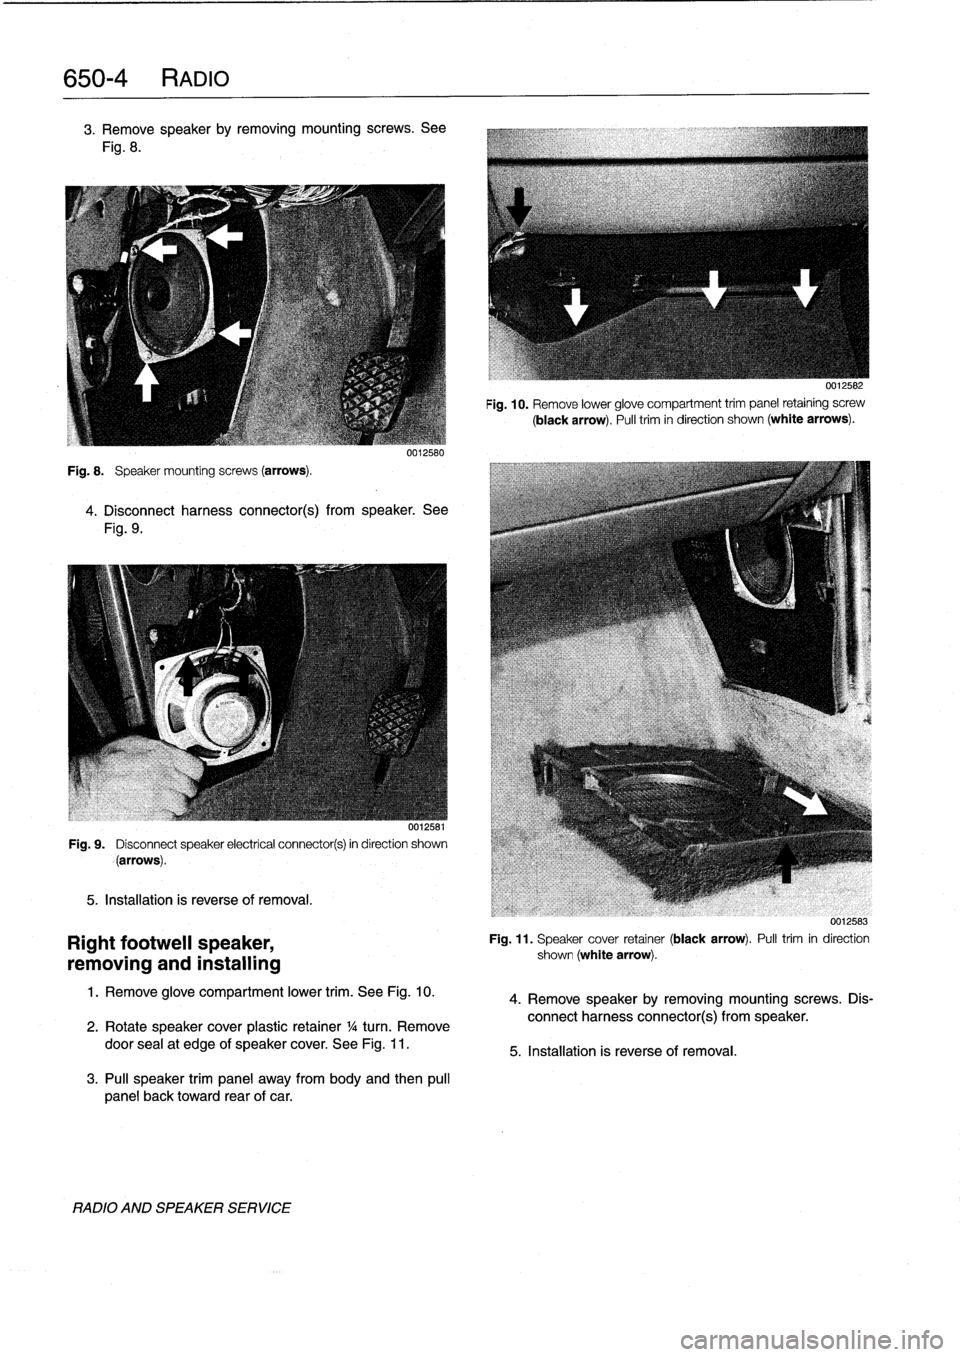 BMW 318i 1997 E36 Owners Guide 
650-
4
RADIO

3
.
Remove
speakerby
removing
mountingscrews
.
See

Fig
.
8
.

Fig
.
8
.

	

Speaker
mounting
screws
(arrows)
.

0012580

4
.
Disconnect
harness
connector(s)
from
speaker
.
See

Fig
.
9